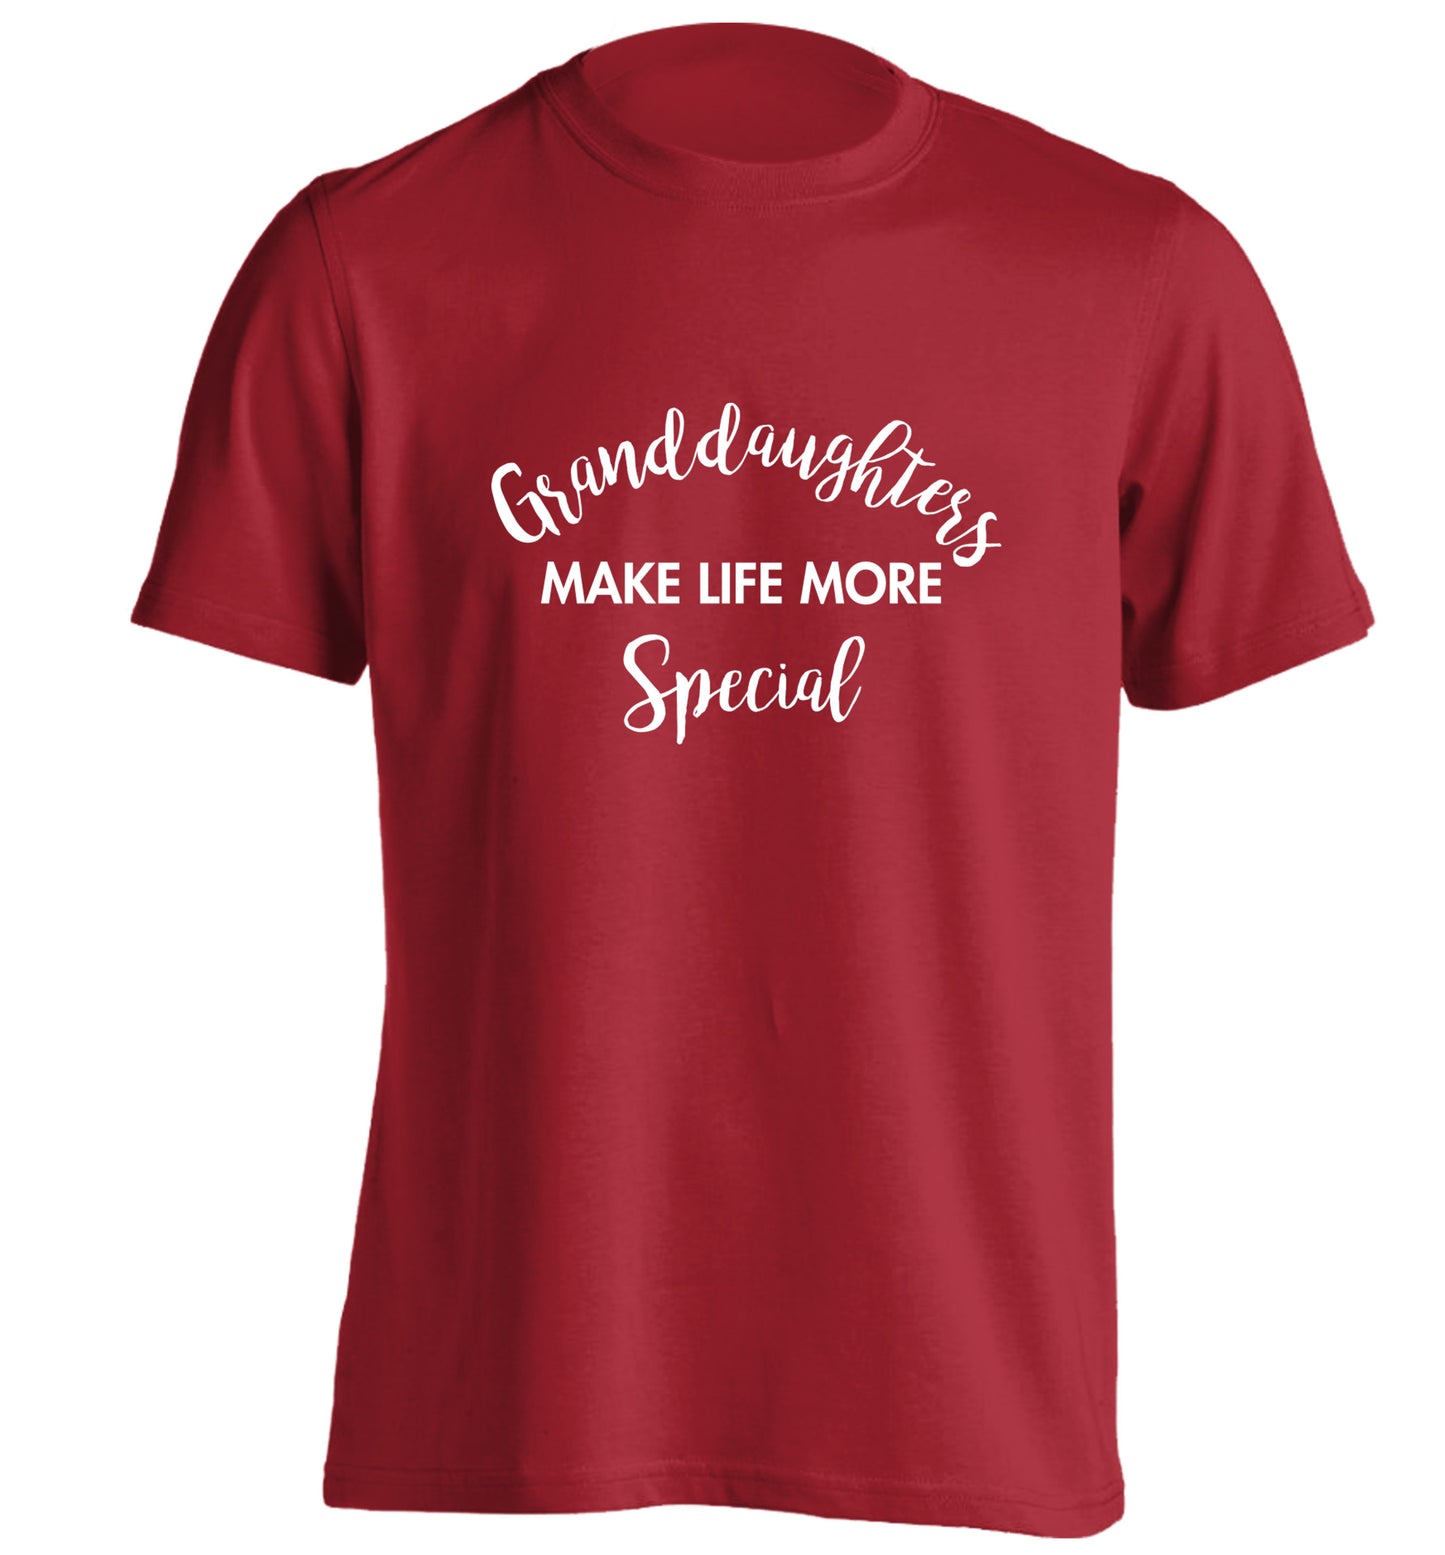 Granddaughters make life more special adults unisex red Tshirt 2XL